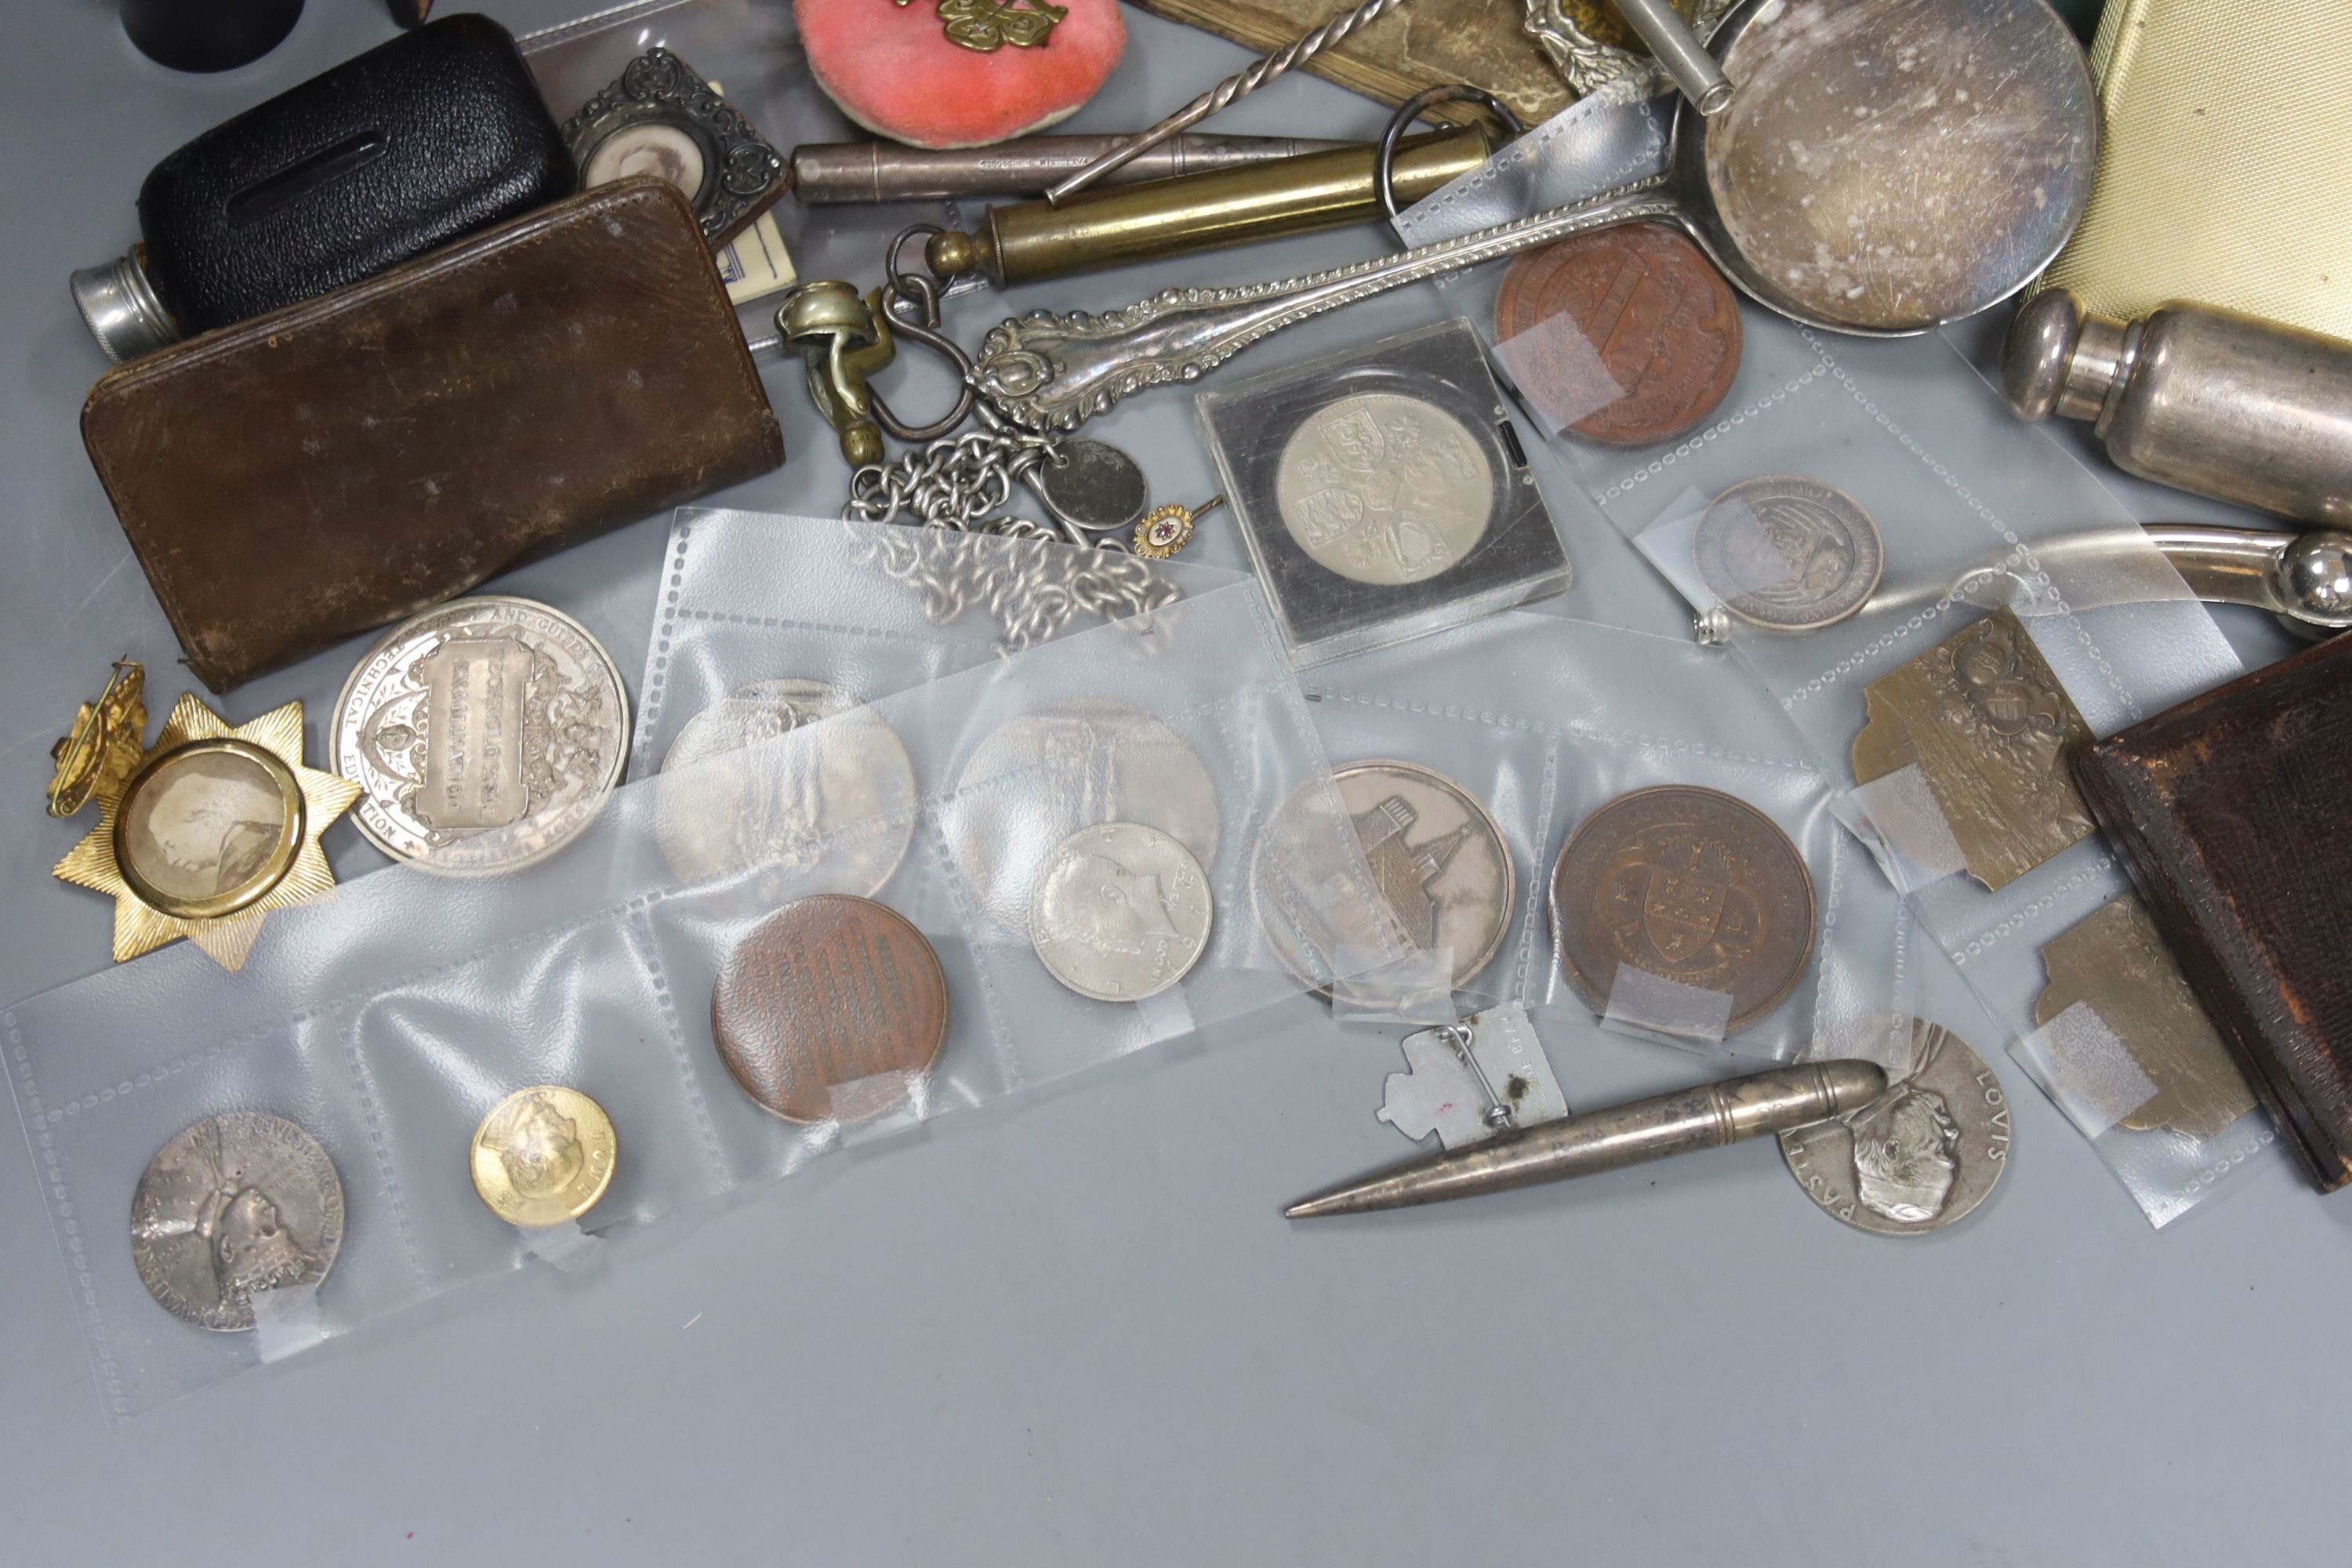 A box of objects of vertu, portrait miniature, coins and medals